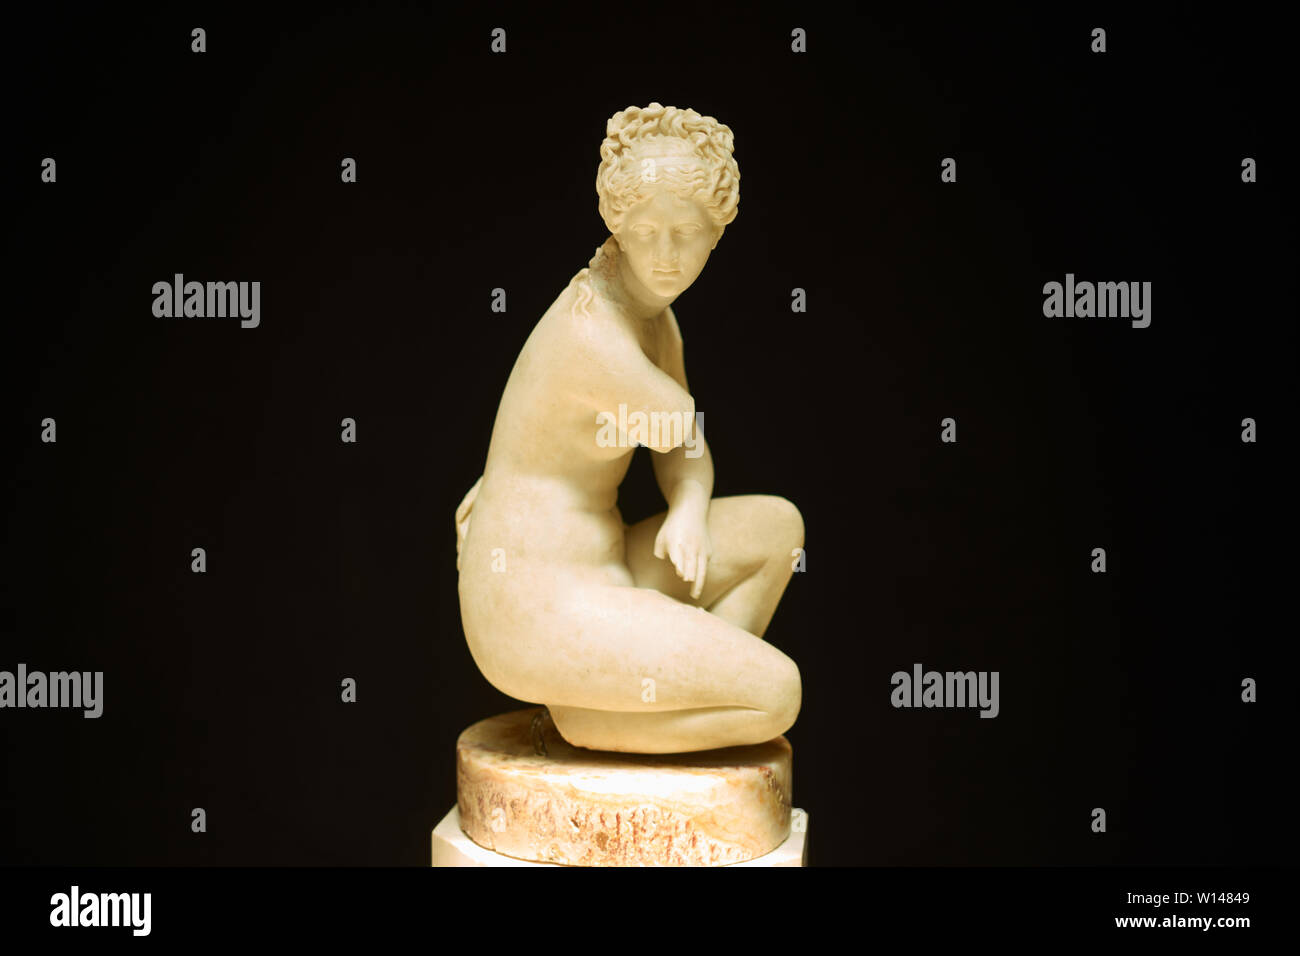 Ancient Roman artwork on display in the museum at Ostia Antica in Italy Stock Photo